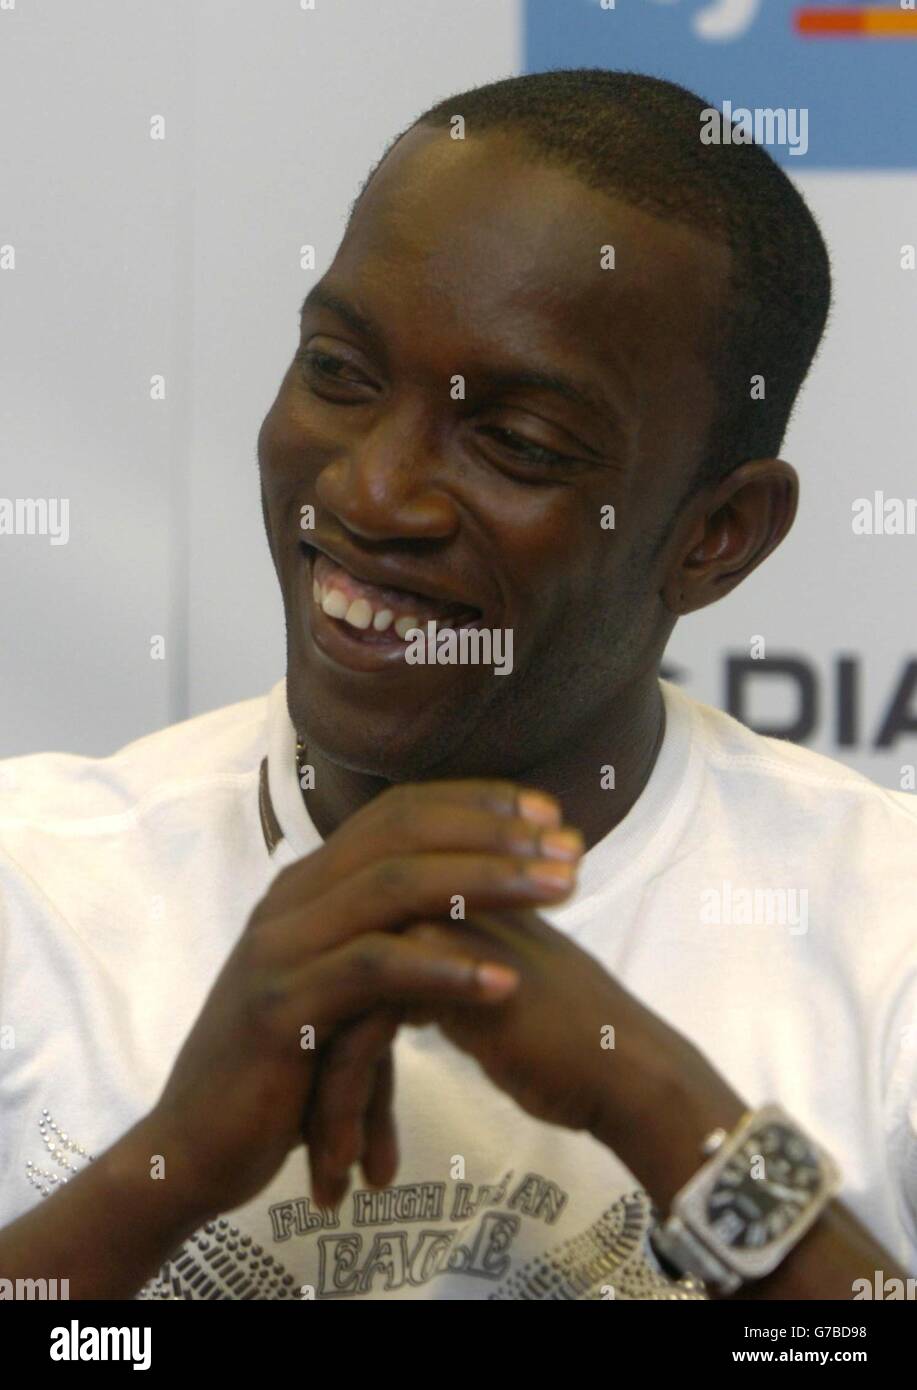 Dwight Yorke is unveilled as the new Birmingham City signing at Wast Hills training ground, Birmingham. Stock Photo